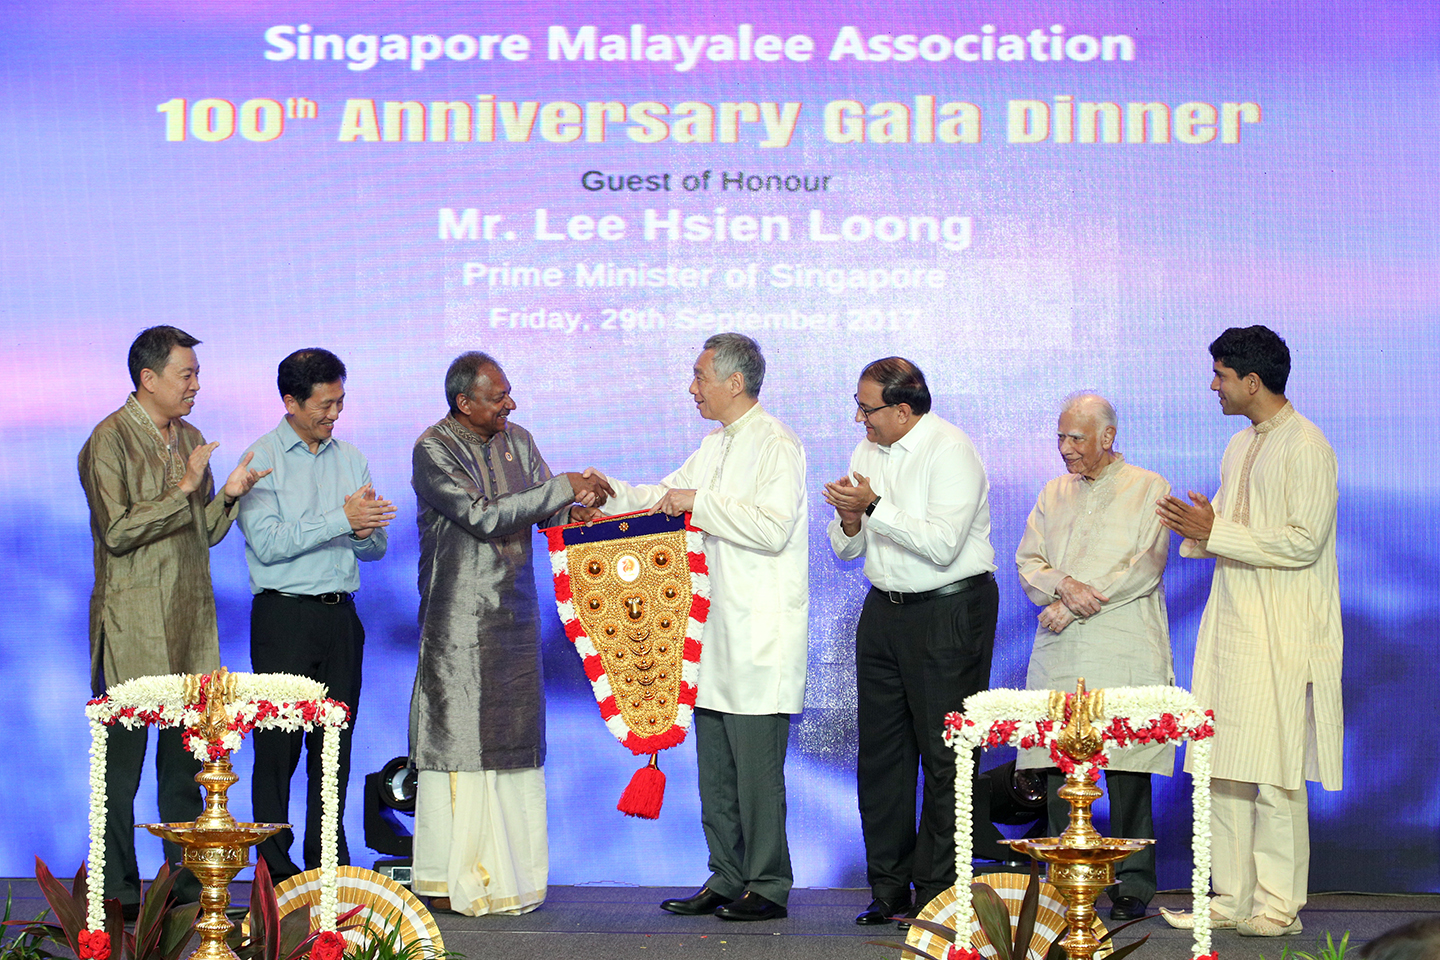 PM Lee Hsien Loong at the Singapore Malayalee Association 100th Anniversary Dinner on 29 Sep 2017 (MCI Photo by Kenji Soon)